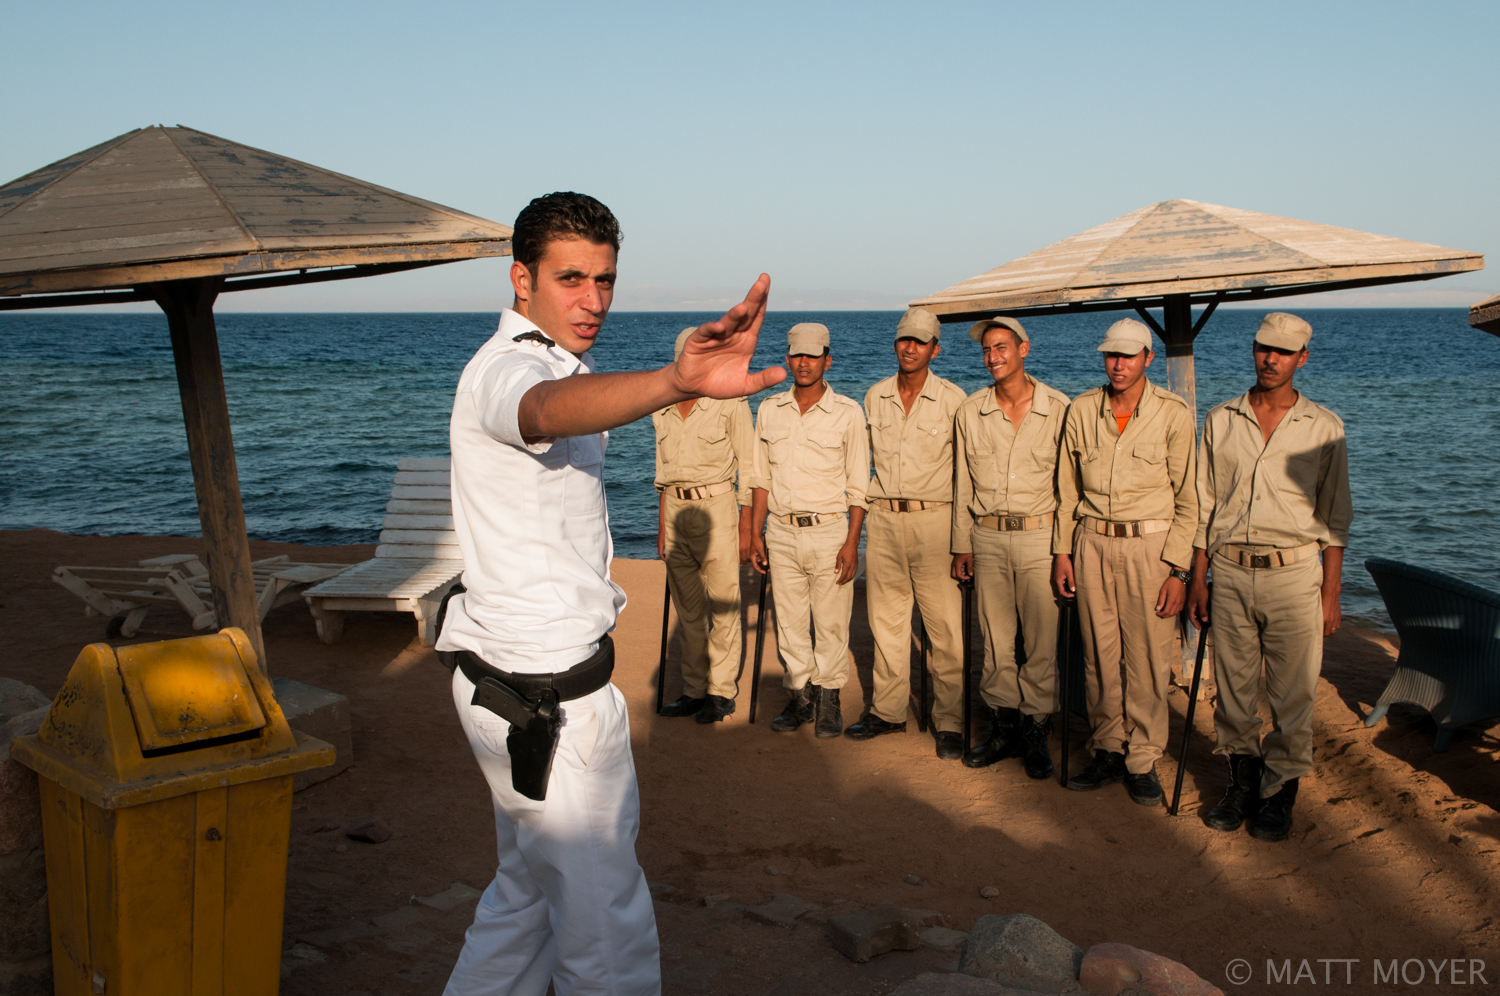  A Mubarak era police officer stops the photographer from taking a pictures in Dahab, Egypt. 